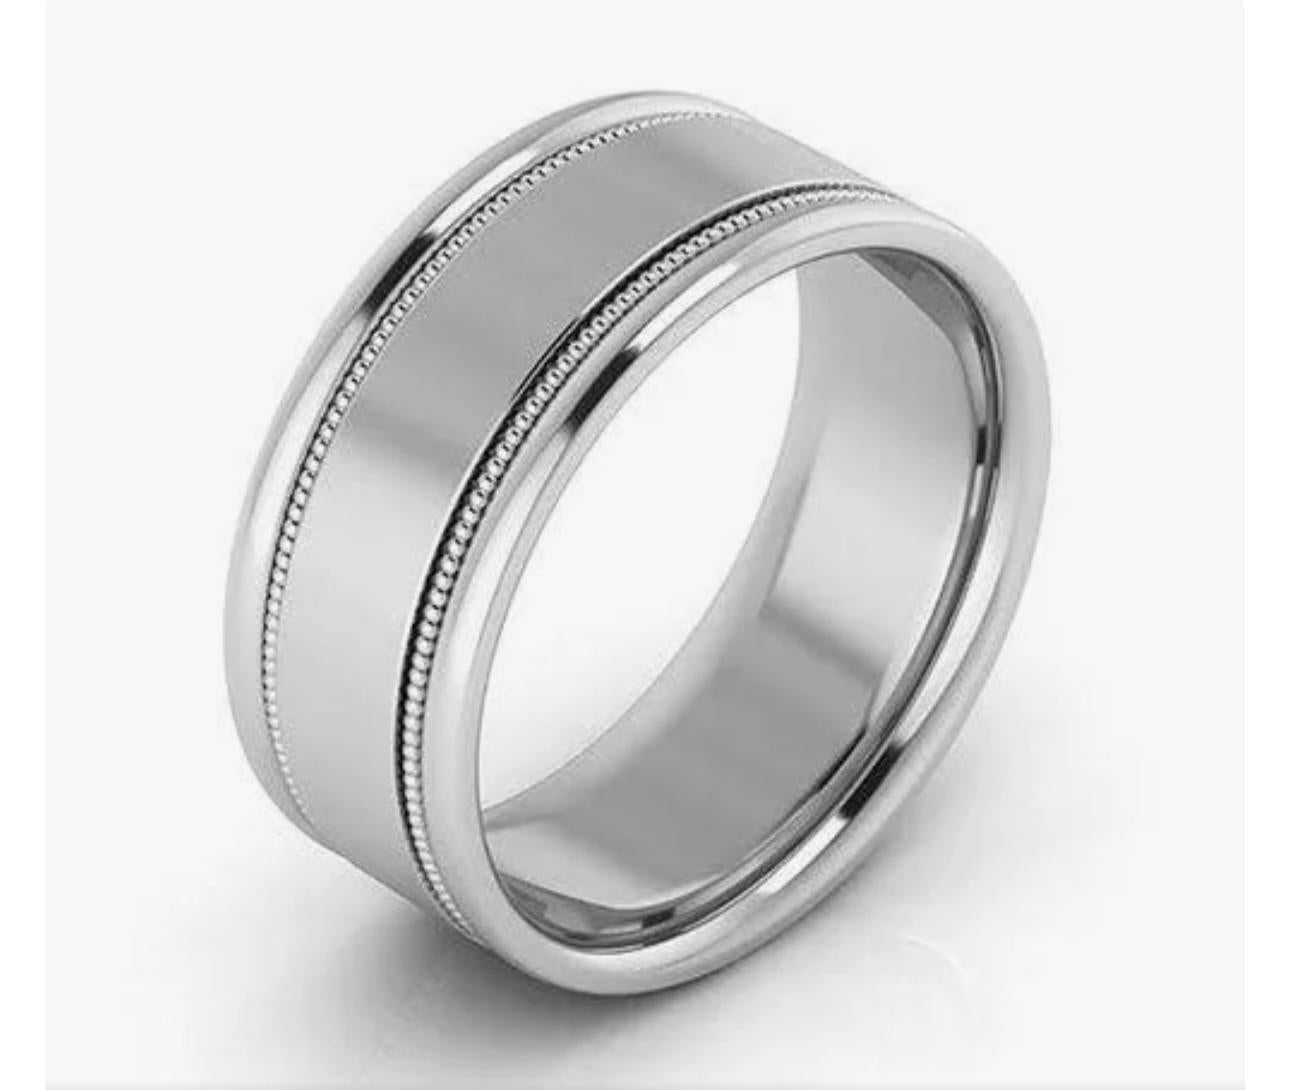 10MM WIDE MILGRAIN EDGE Platinum Plain Wedding Band Ring 24.2 Grams, COMFORT FIT
This men’s or unisex  wedding band, crafted in Platinum , measures 10 mm in width and  2.4 mm thickness is a size 11
 It weighs 24.2 grams.
Comfort fit with round